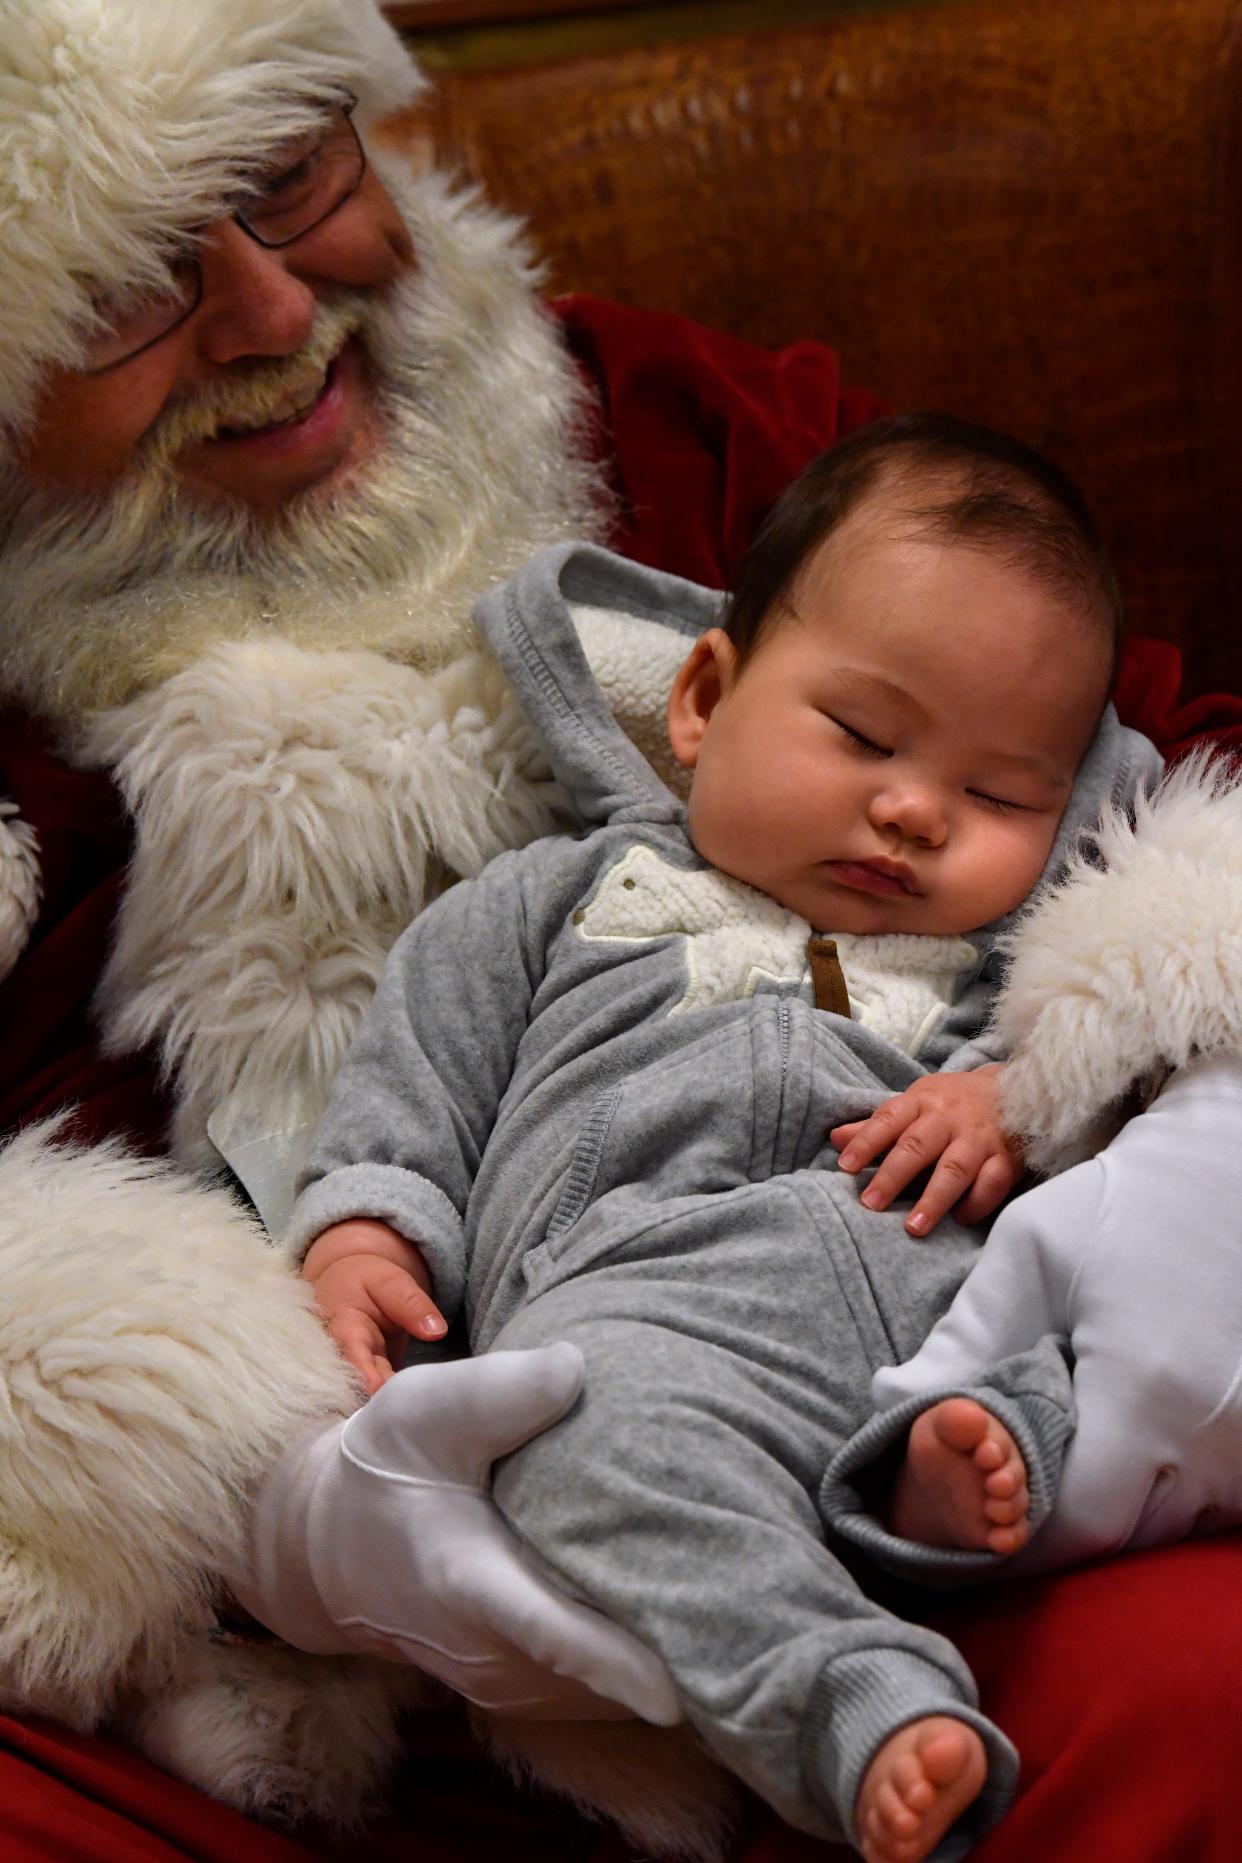 Four-month-old Ryusuke Thaxton dozes in Santa Claus' lap at the Abilene Zoo in Dec. 2018.